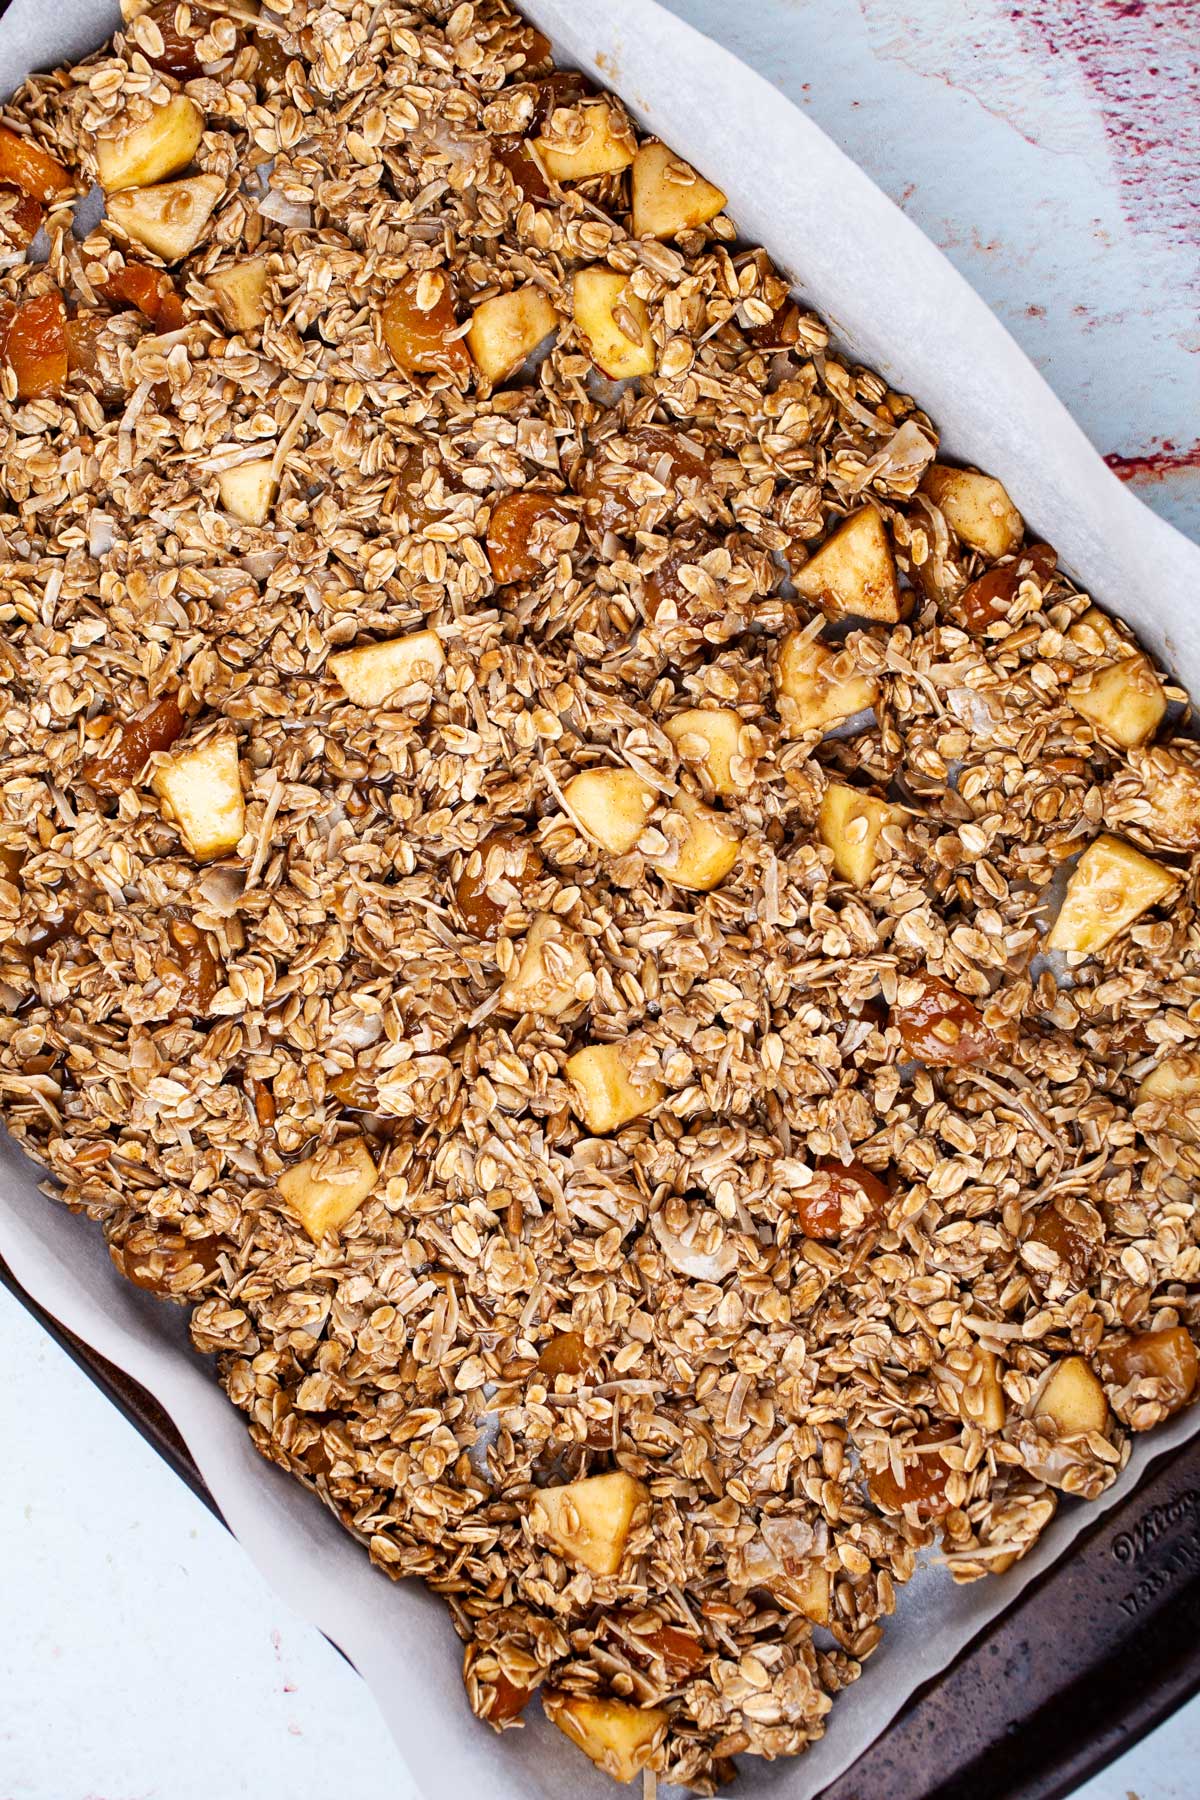 An oat mixture evenly spread over a large prepared baking pan, ready to go into the oven.